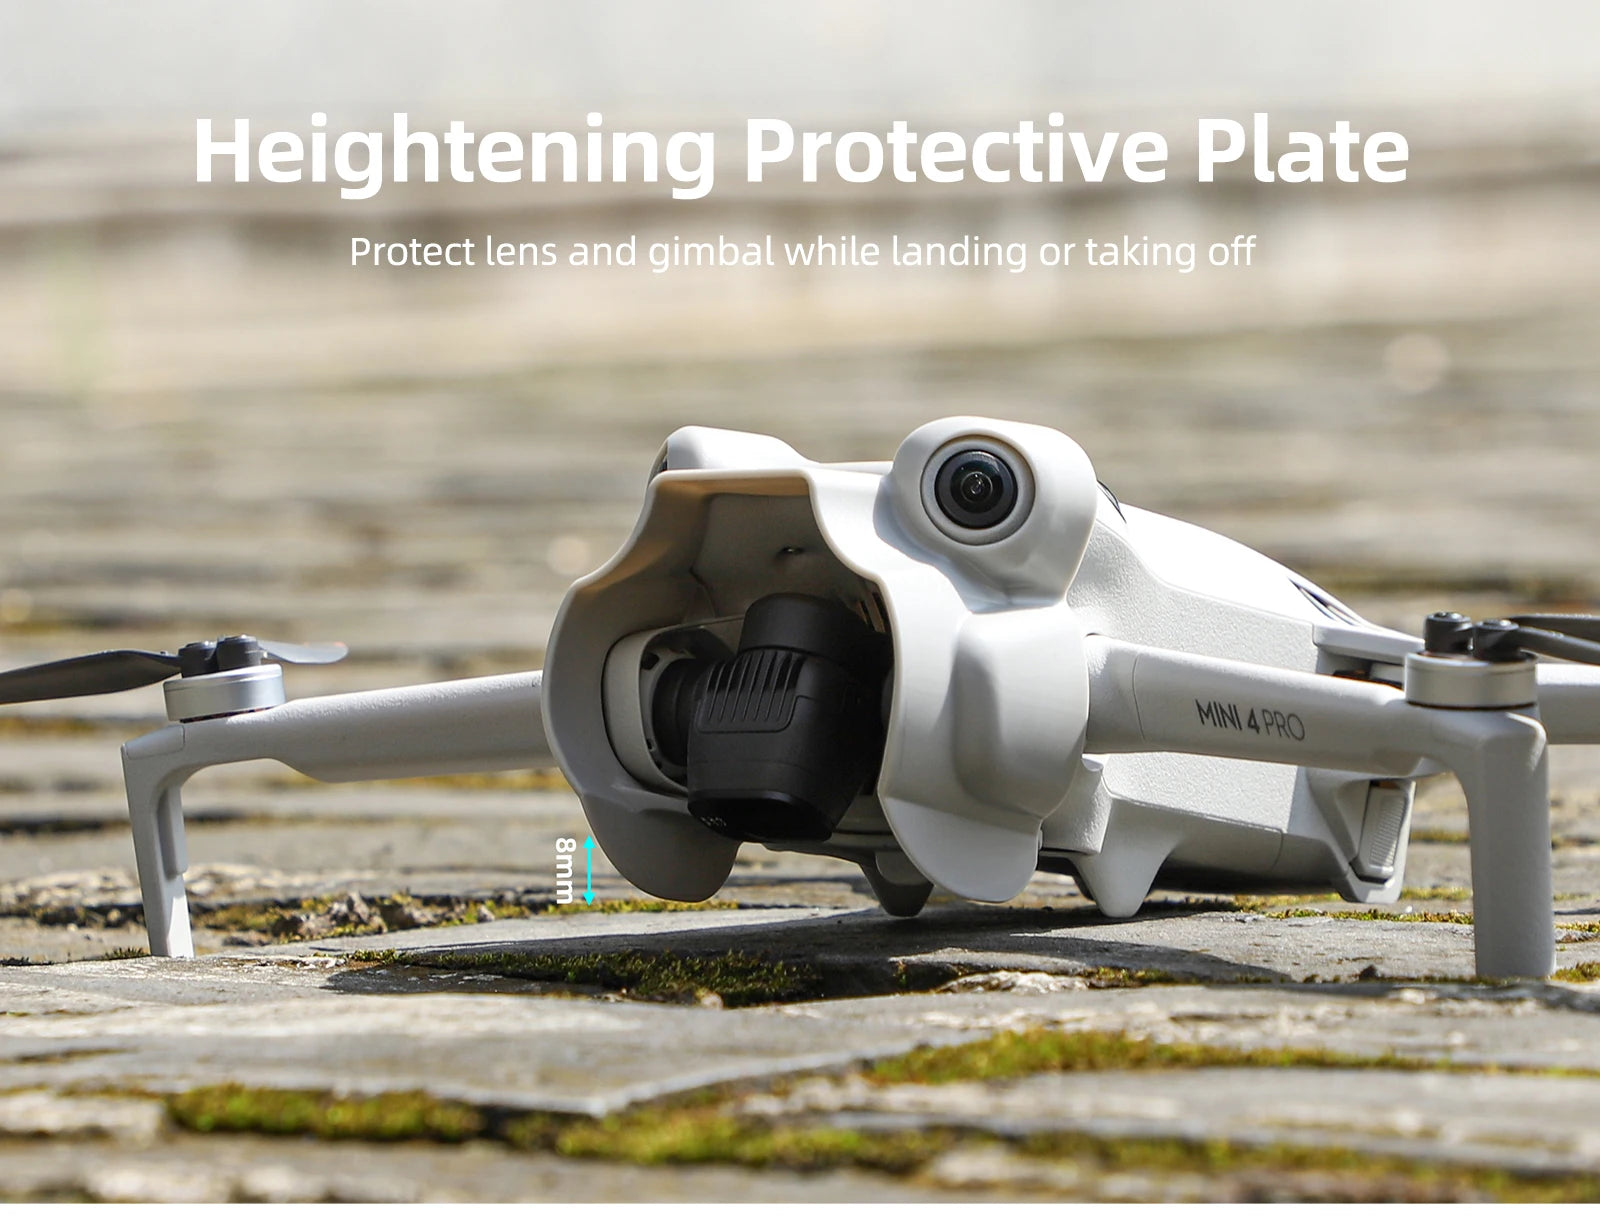 Accessories Kit for DJI Mini 4 Pro, Heightening Protective Plate Protect lens and gimbal while landing or taking off 4